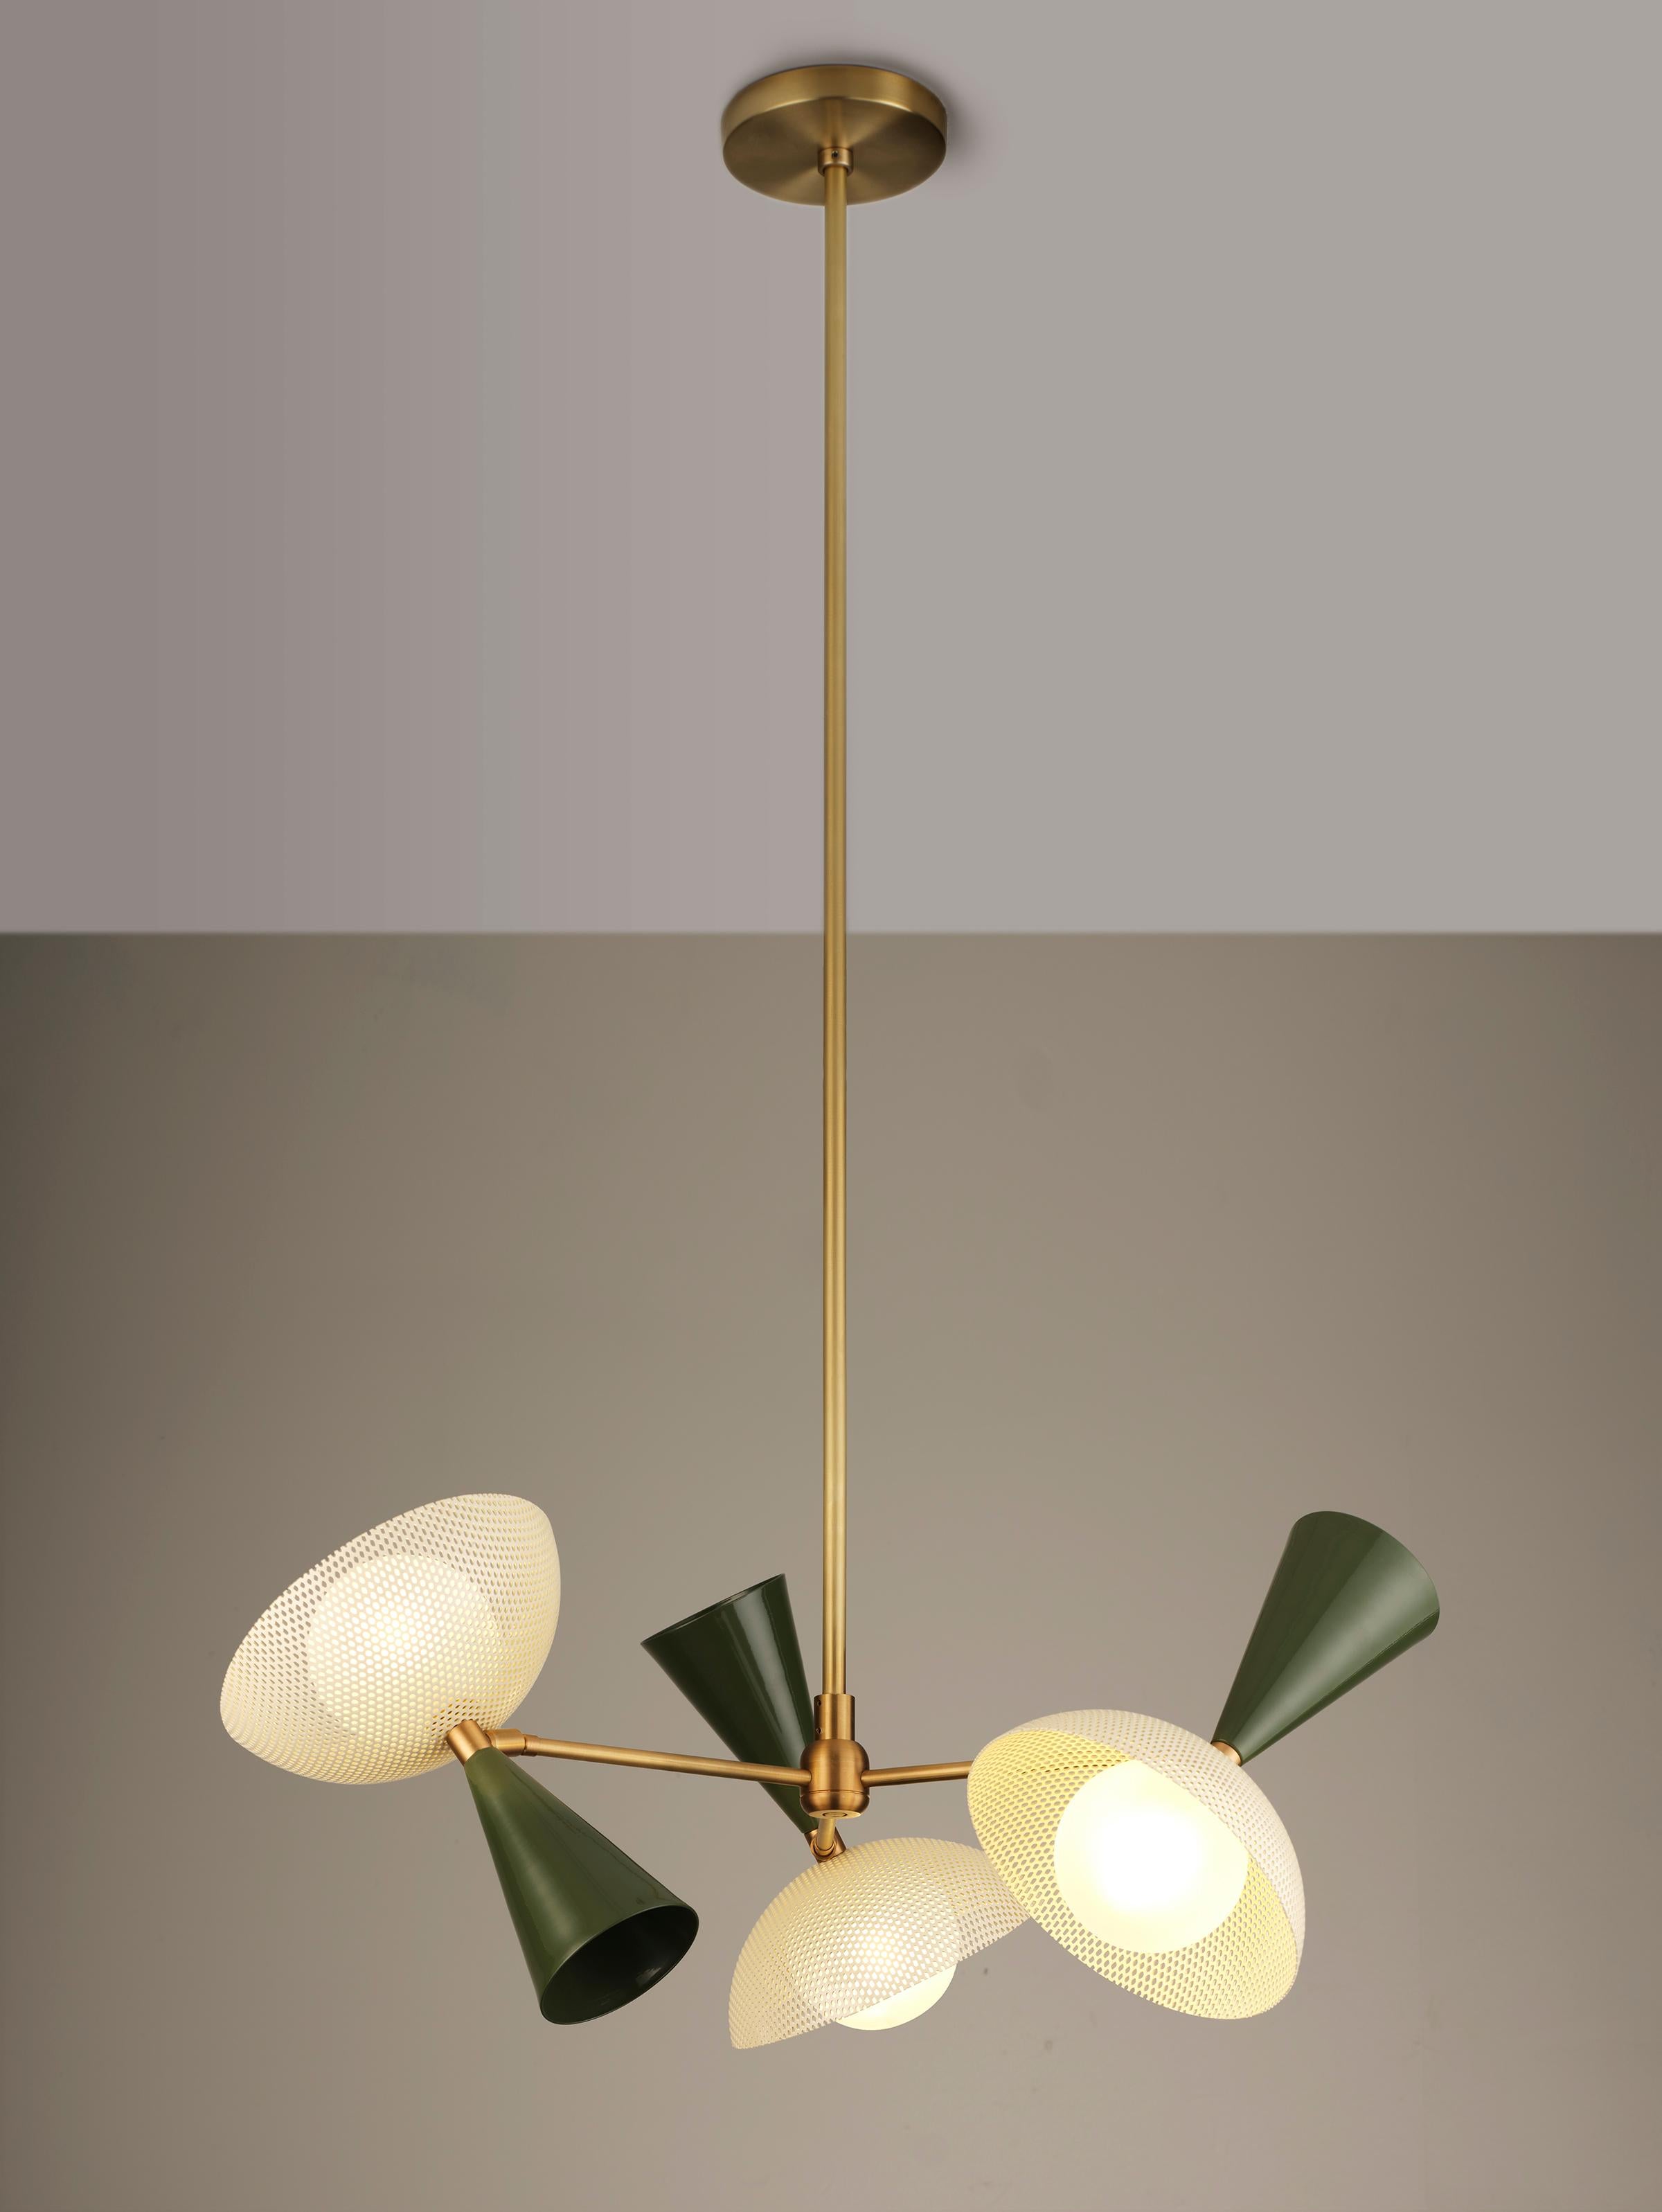 Molto 3-Arm Ceiling Pendant in Natural Brass + Enameled Mesh, Blueprint Lighting In New Condition For Sale In New York, NY